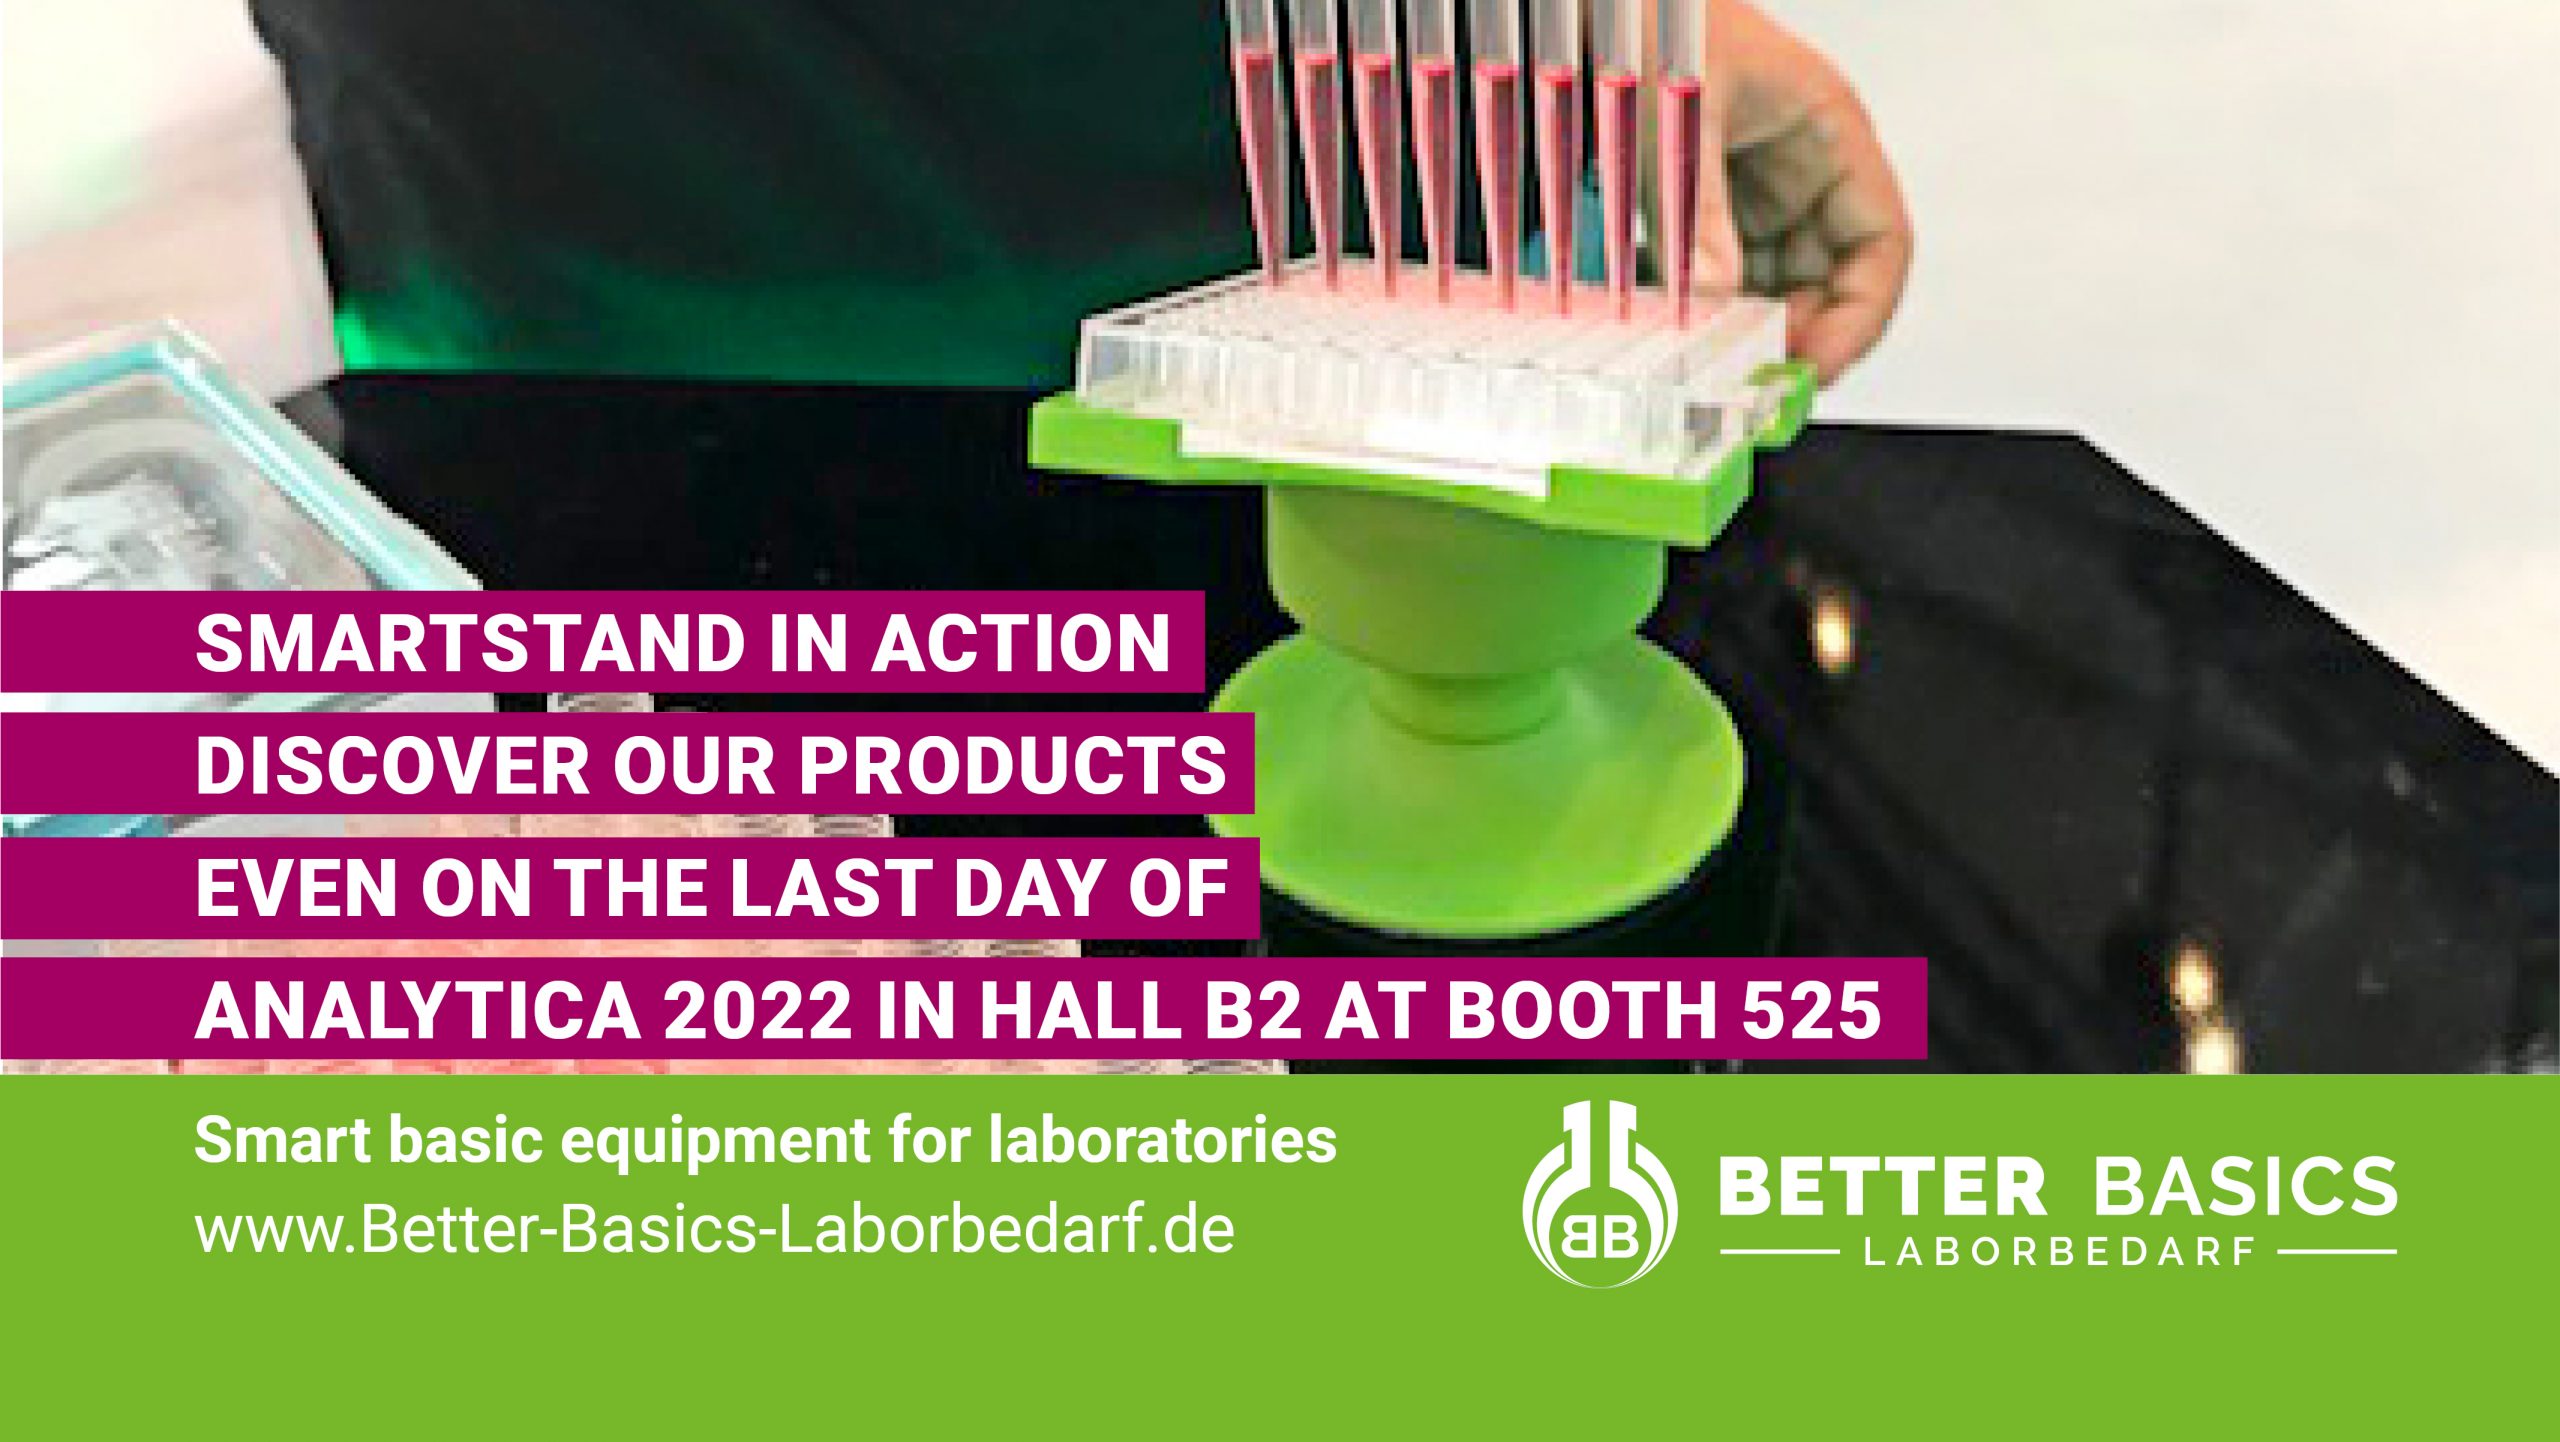 Better Basics Laborbedarf GmbH News Beitrag EN- Smartstand in action discover our products even on the last day of Analytica 2022 in Hall B2 at booth 525